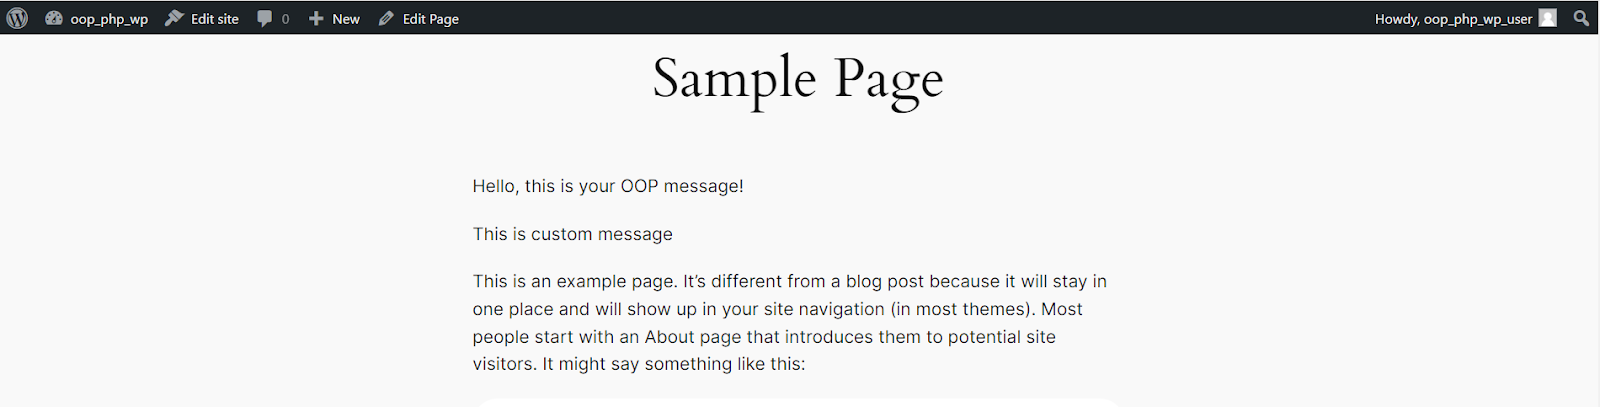 Screenshot of the Sample Page. It displays two messages: 